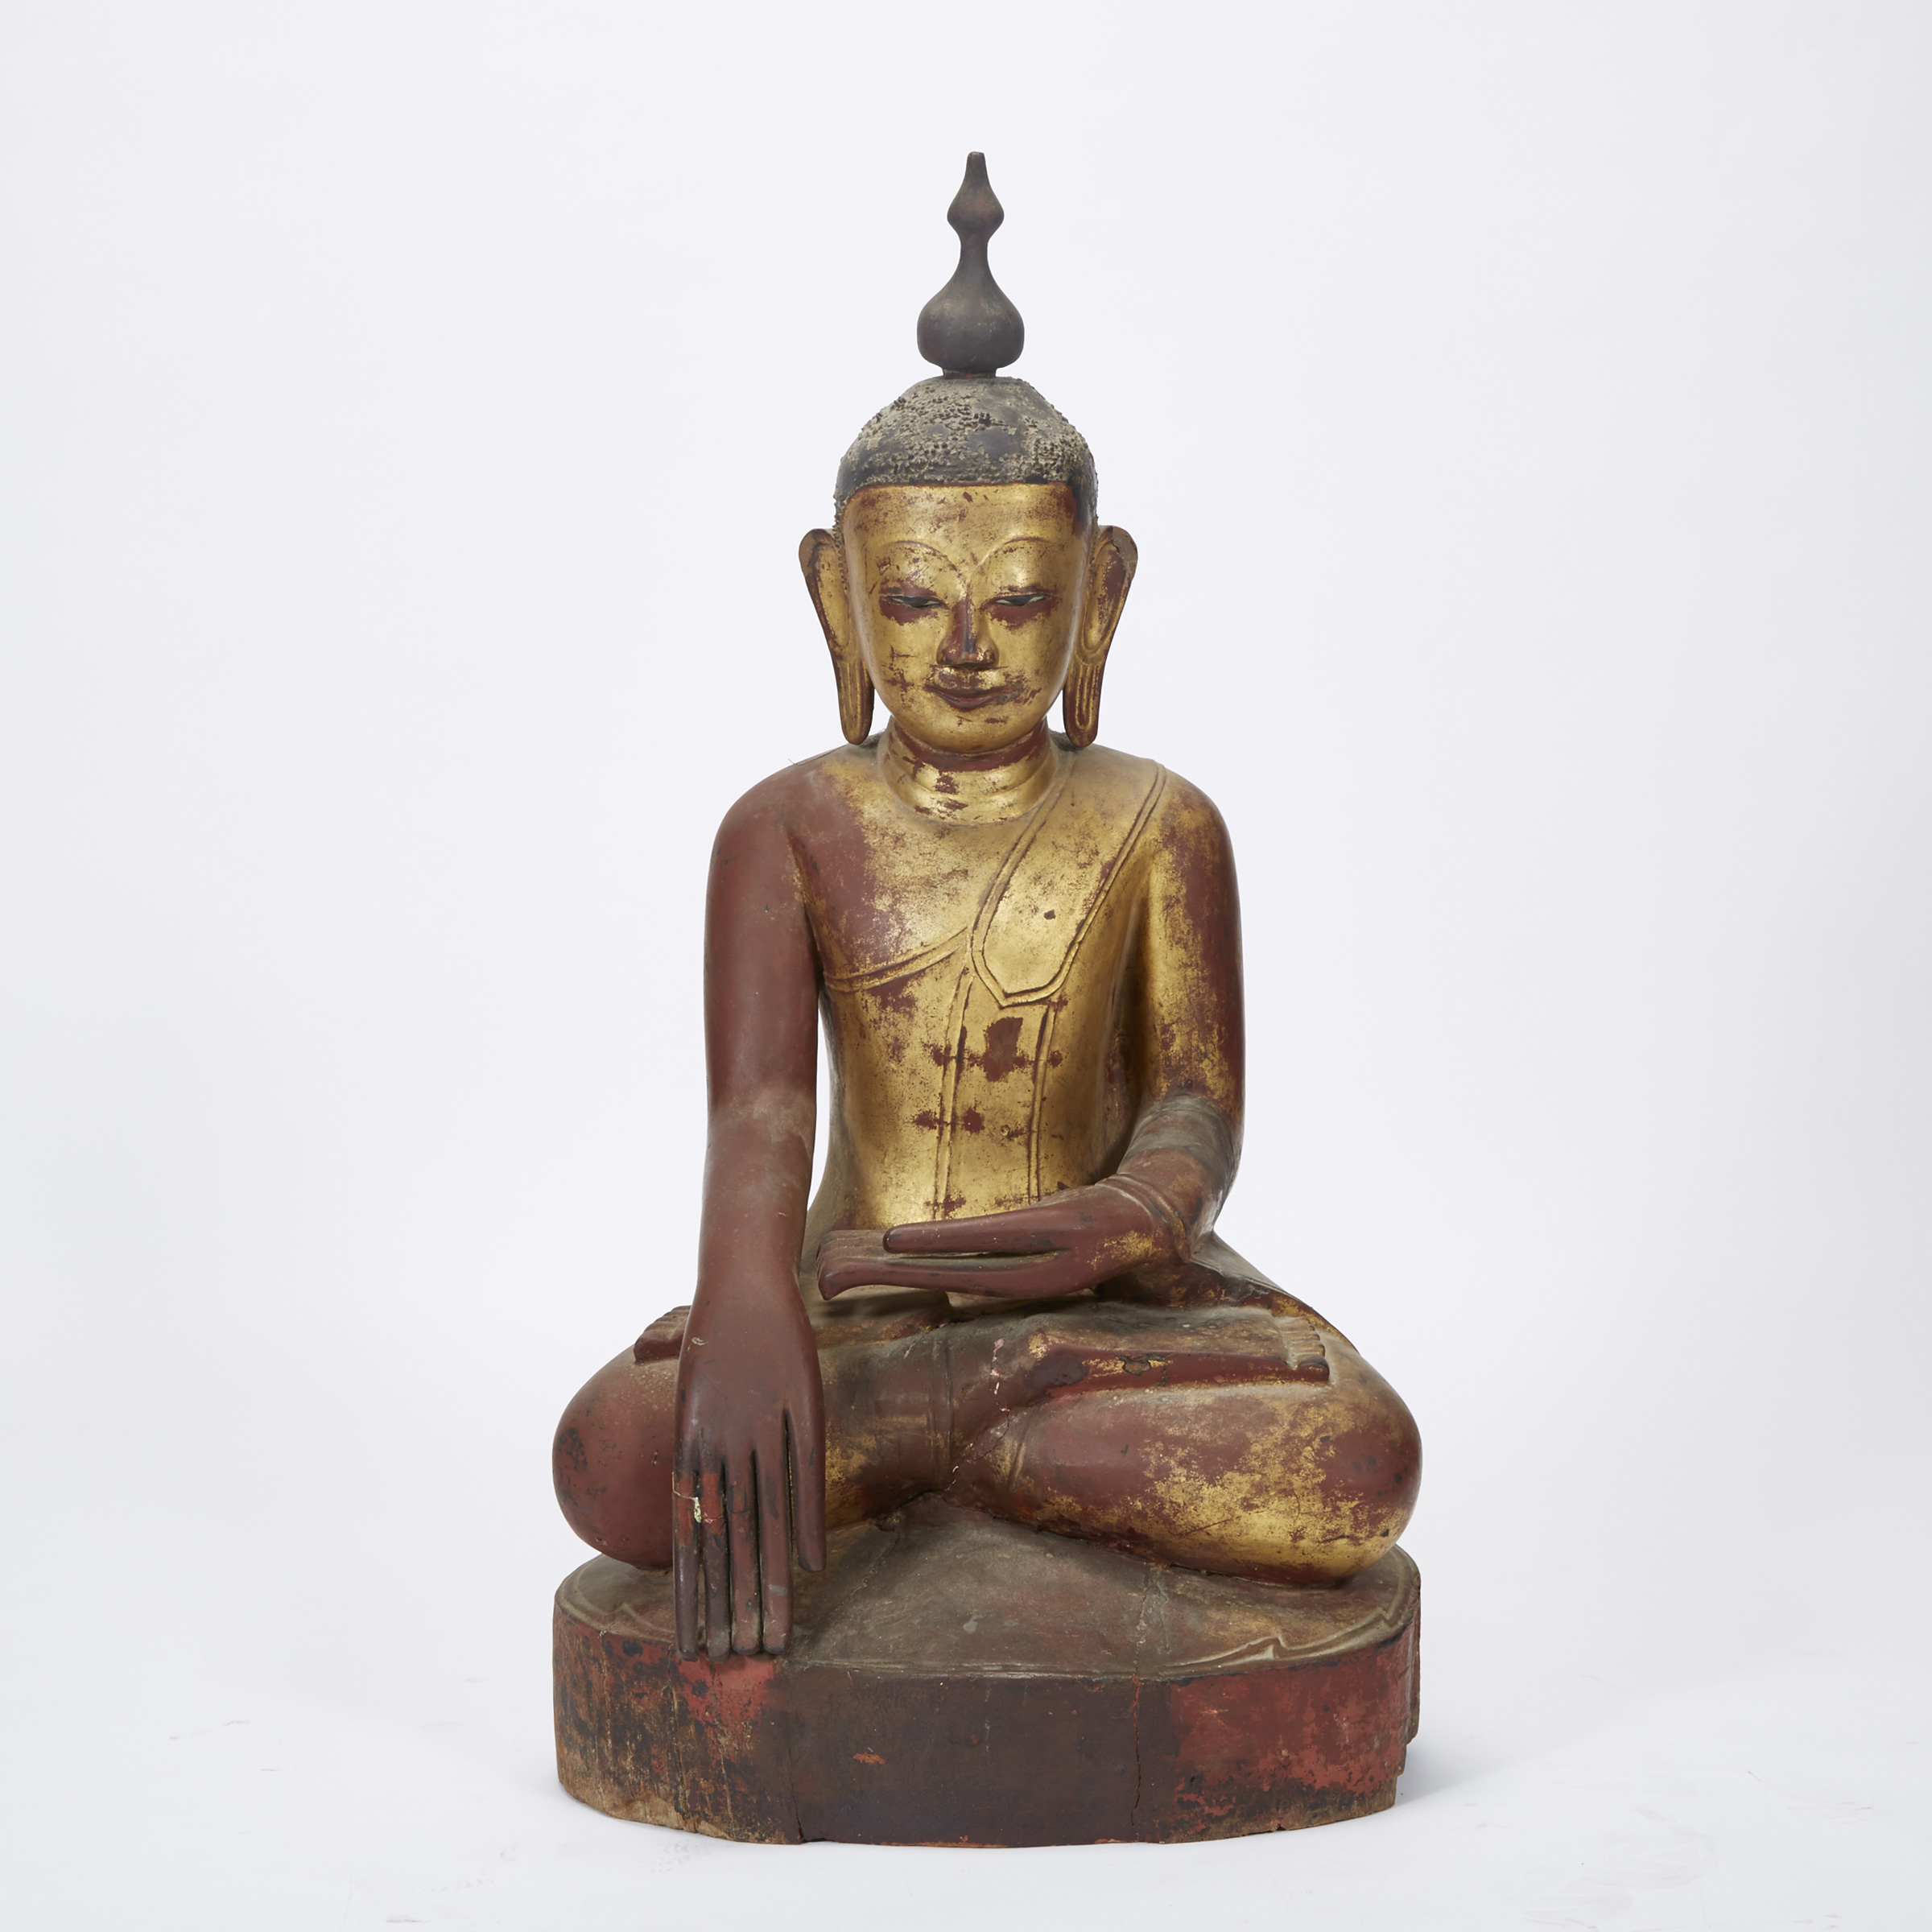 A Large Gilt and Red Lacquered Wooden Burmese Buddha, Shan Style, 18th/19th Century